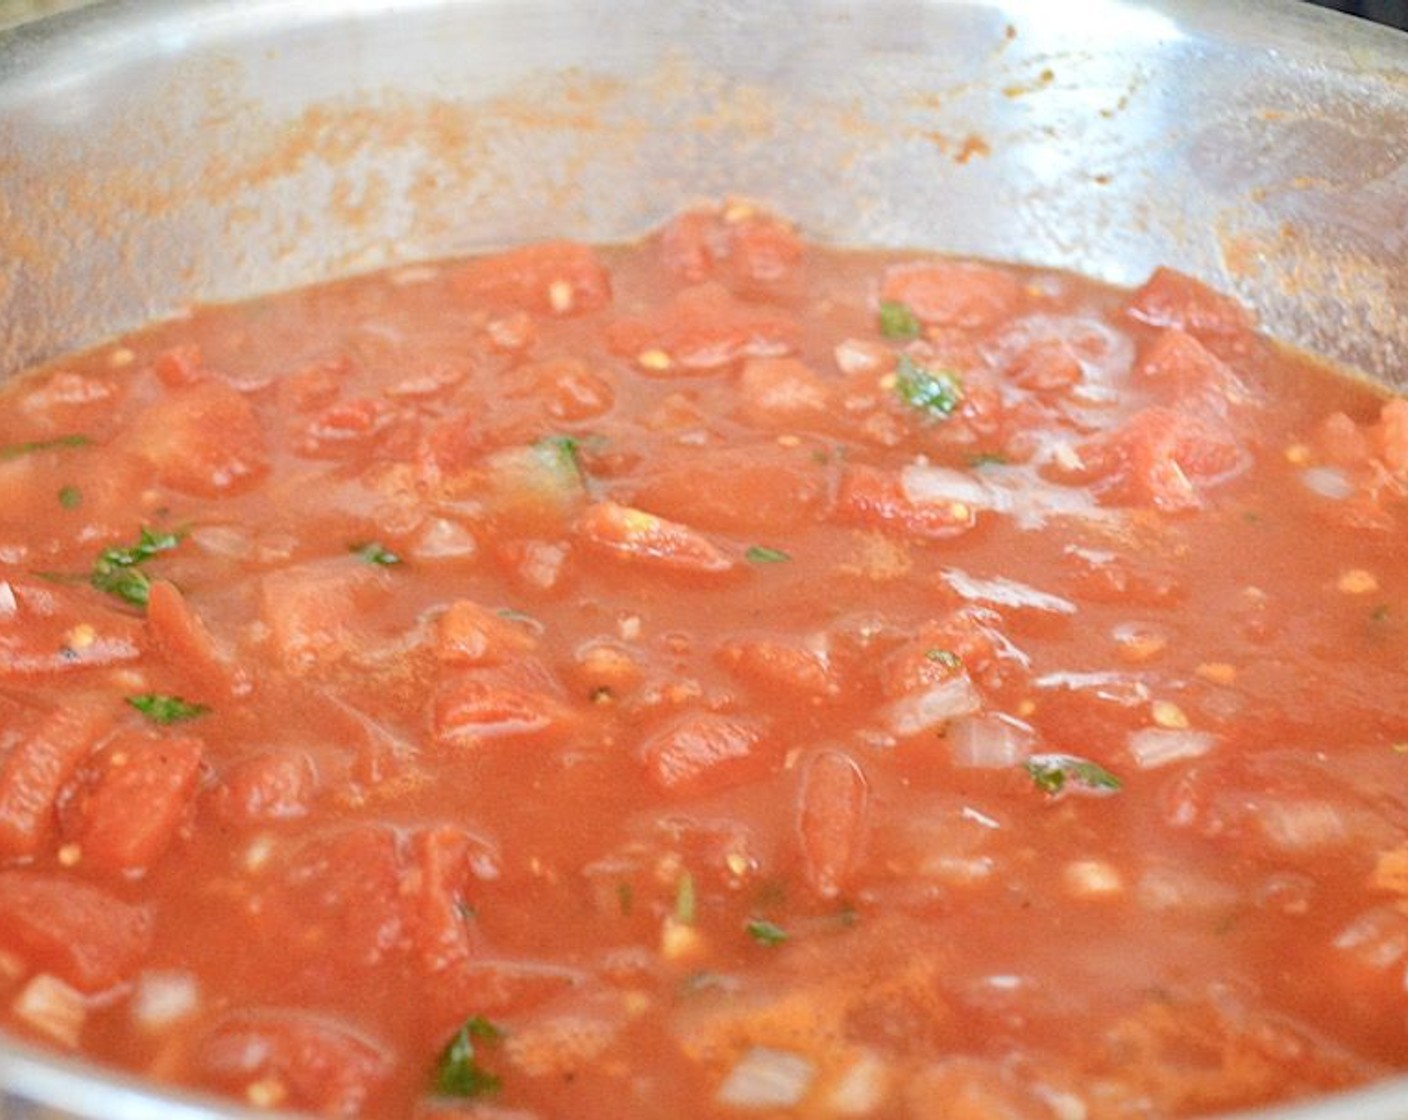 step 6 Add in the Canned Diced Tomatoes (3 1/2 cups), Salt (1 pinch), and Ground Black Pepper (1 pinch). Let it simmer and develop flavor.